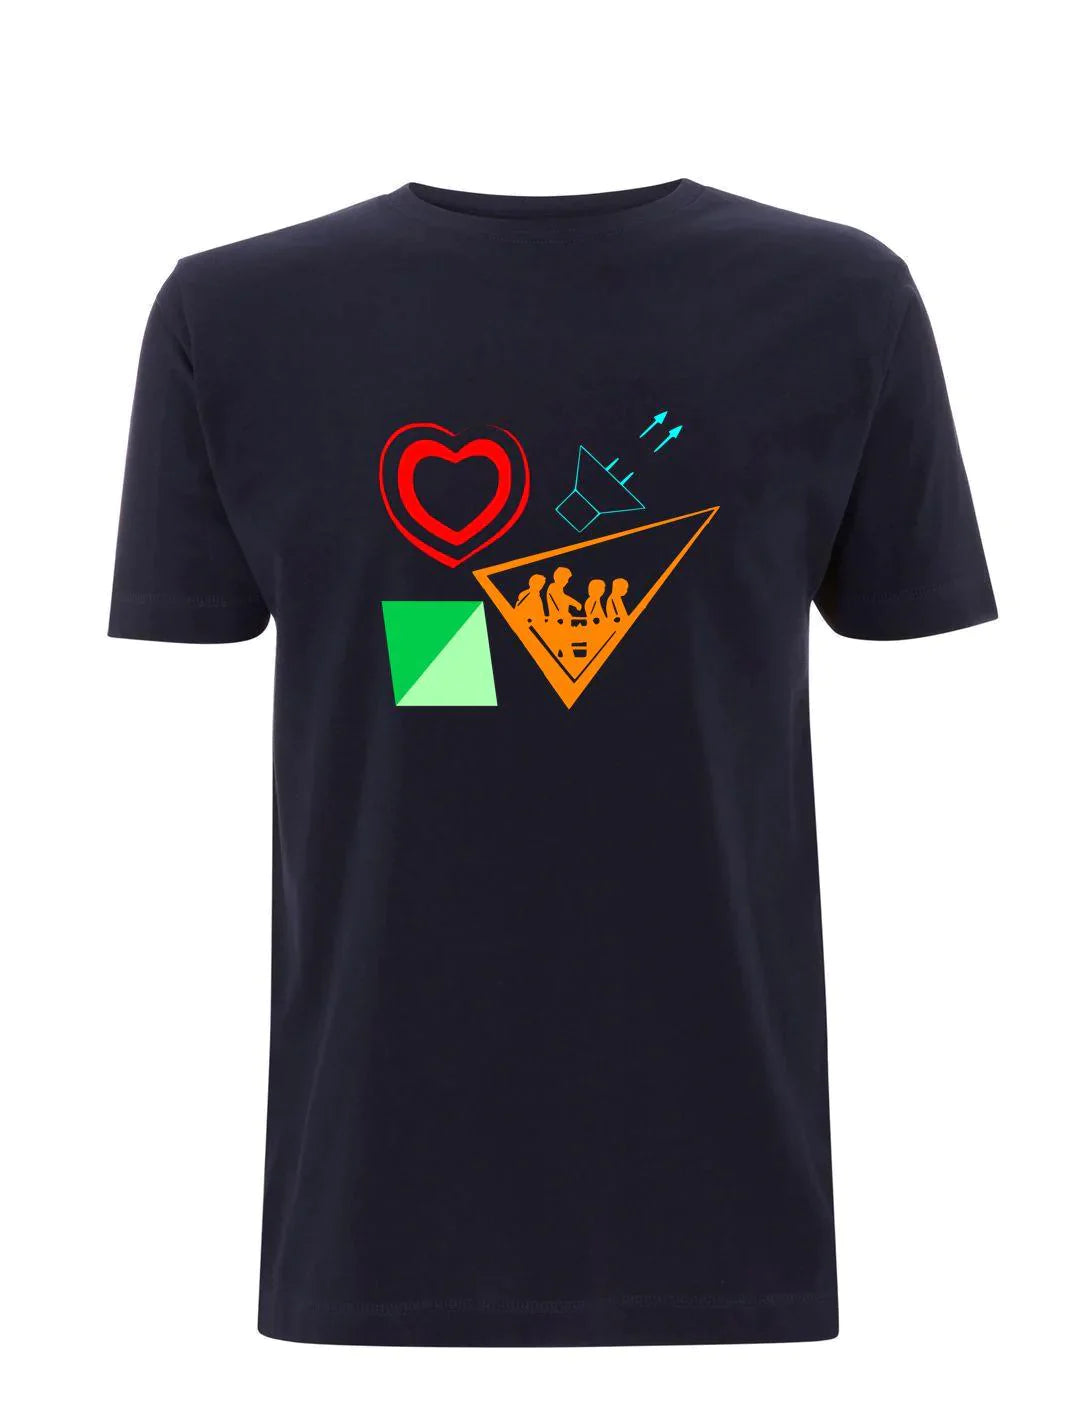 EVER FALLEN IN LOVE: T-Shirt Inspired by The Buzzcocks - SOUND IS COLOUR